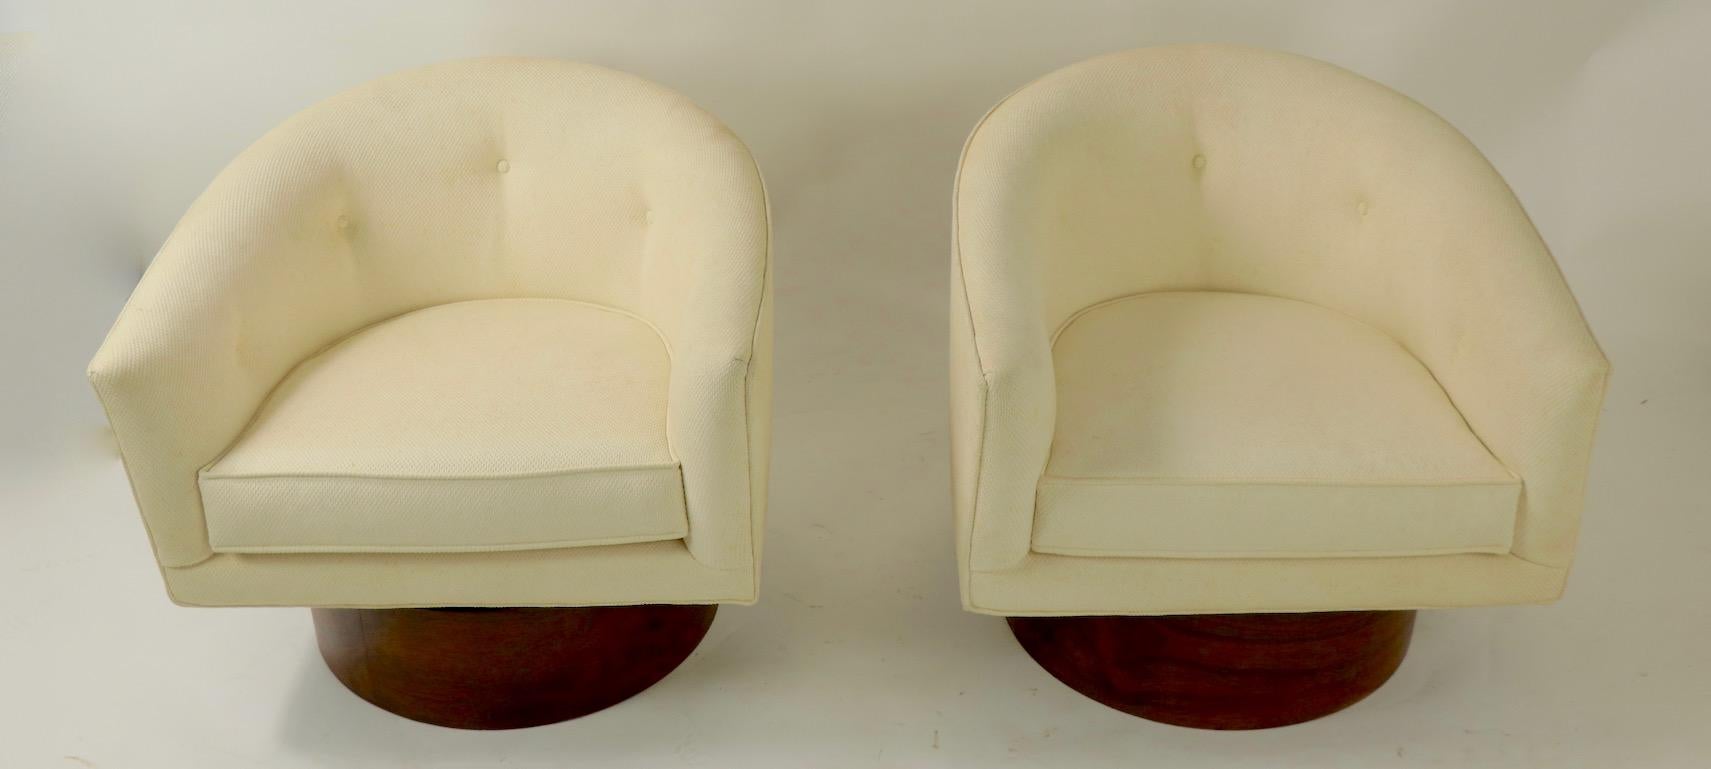 20th Century Pair of Swivel Chairs by Baughman for Thayer Coggin